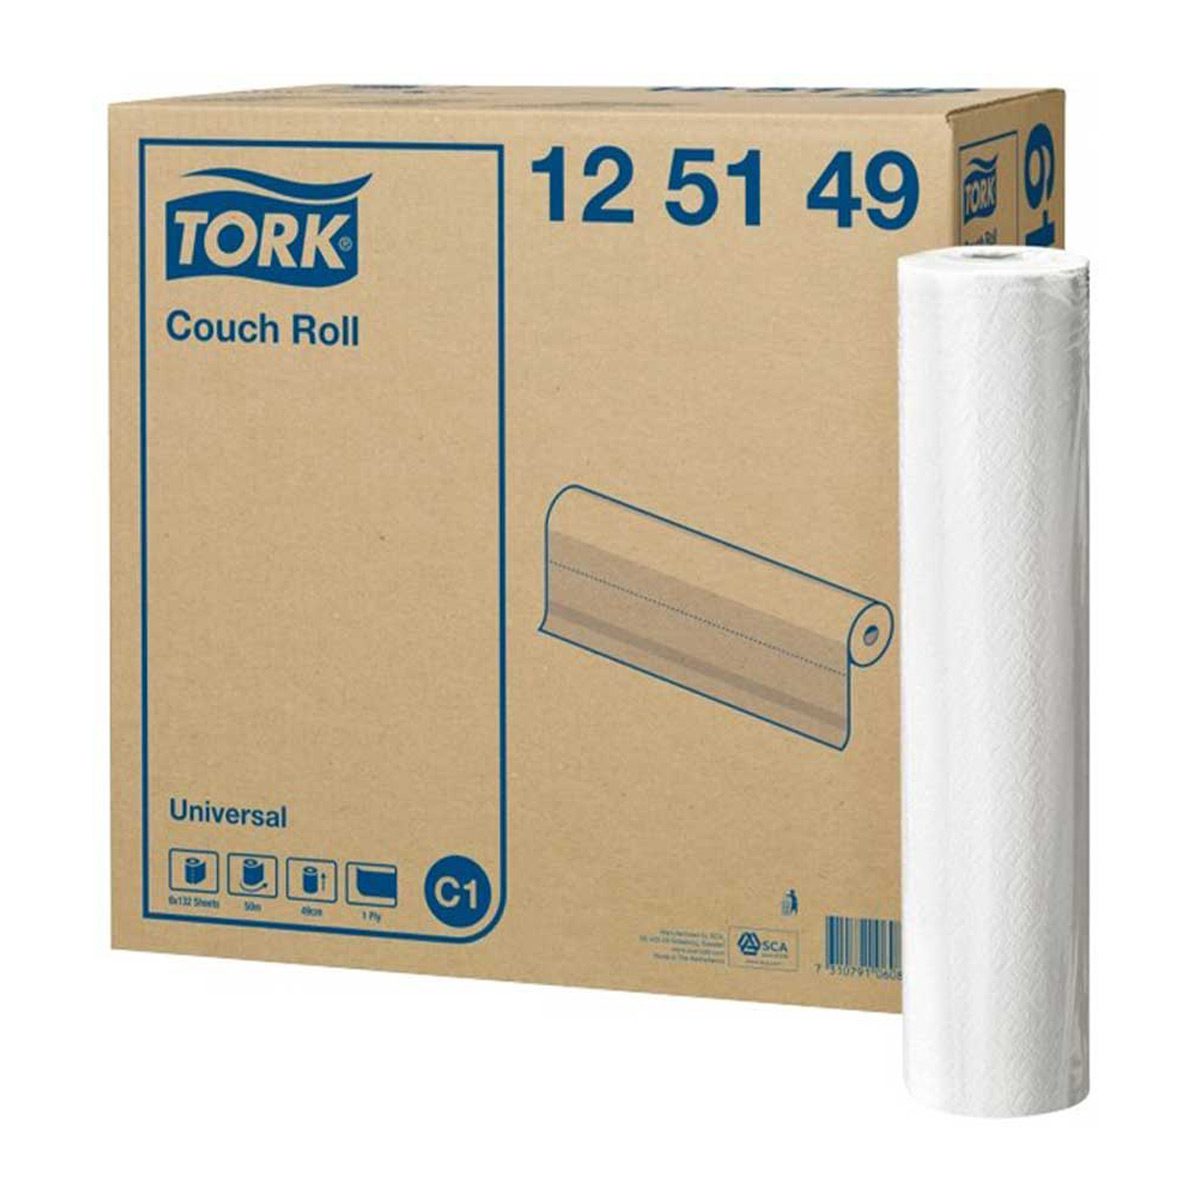 paper-products-paper-towels-tork-couch-roll-49cm-x-50m-metres-white-universal-1ply-180-sheets-8-rolls-c1-rolls-can-be-used-in-tork-couch-roll-dispenser-vjs-distributors-125149